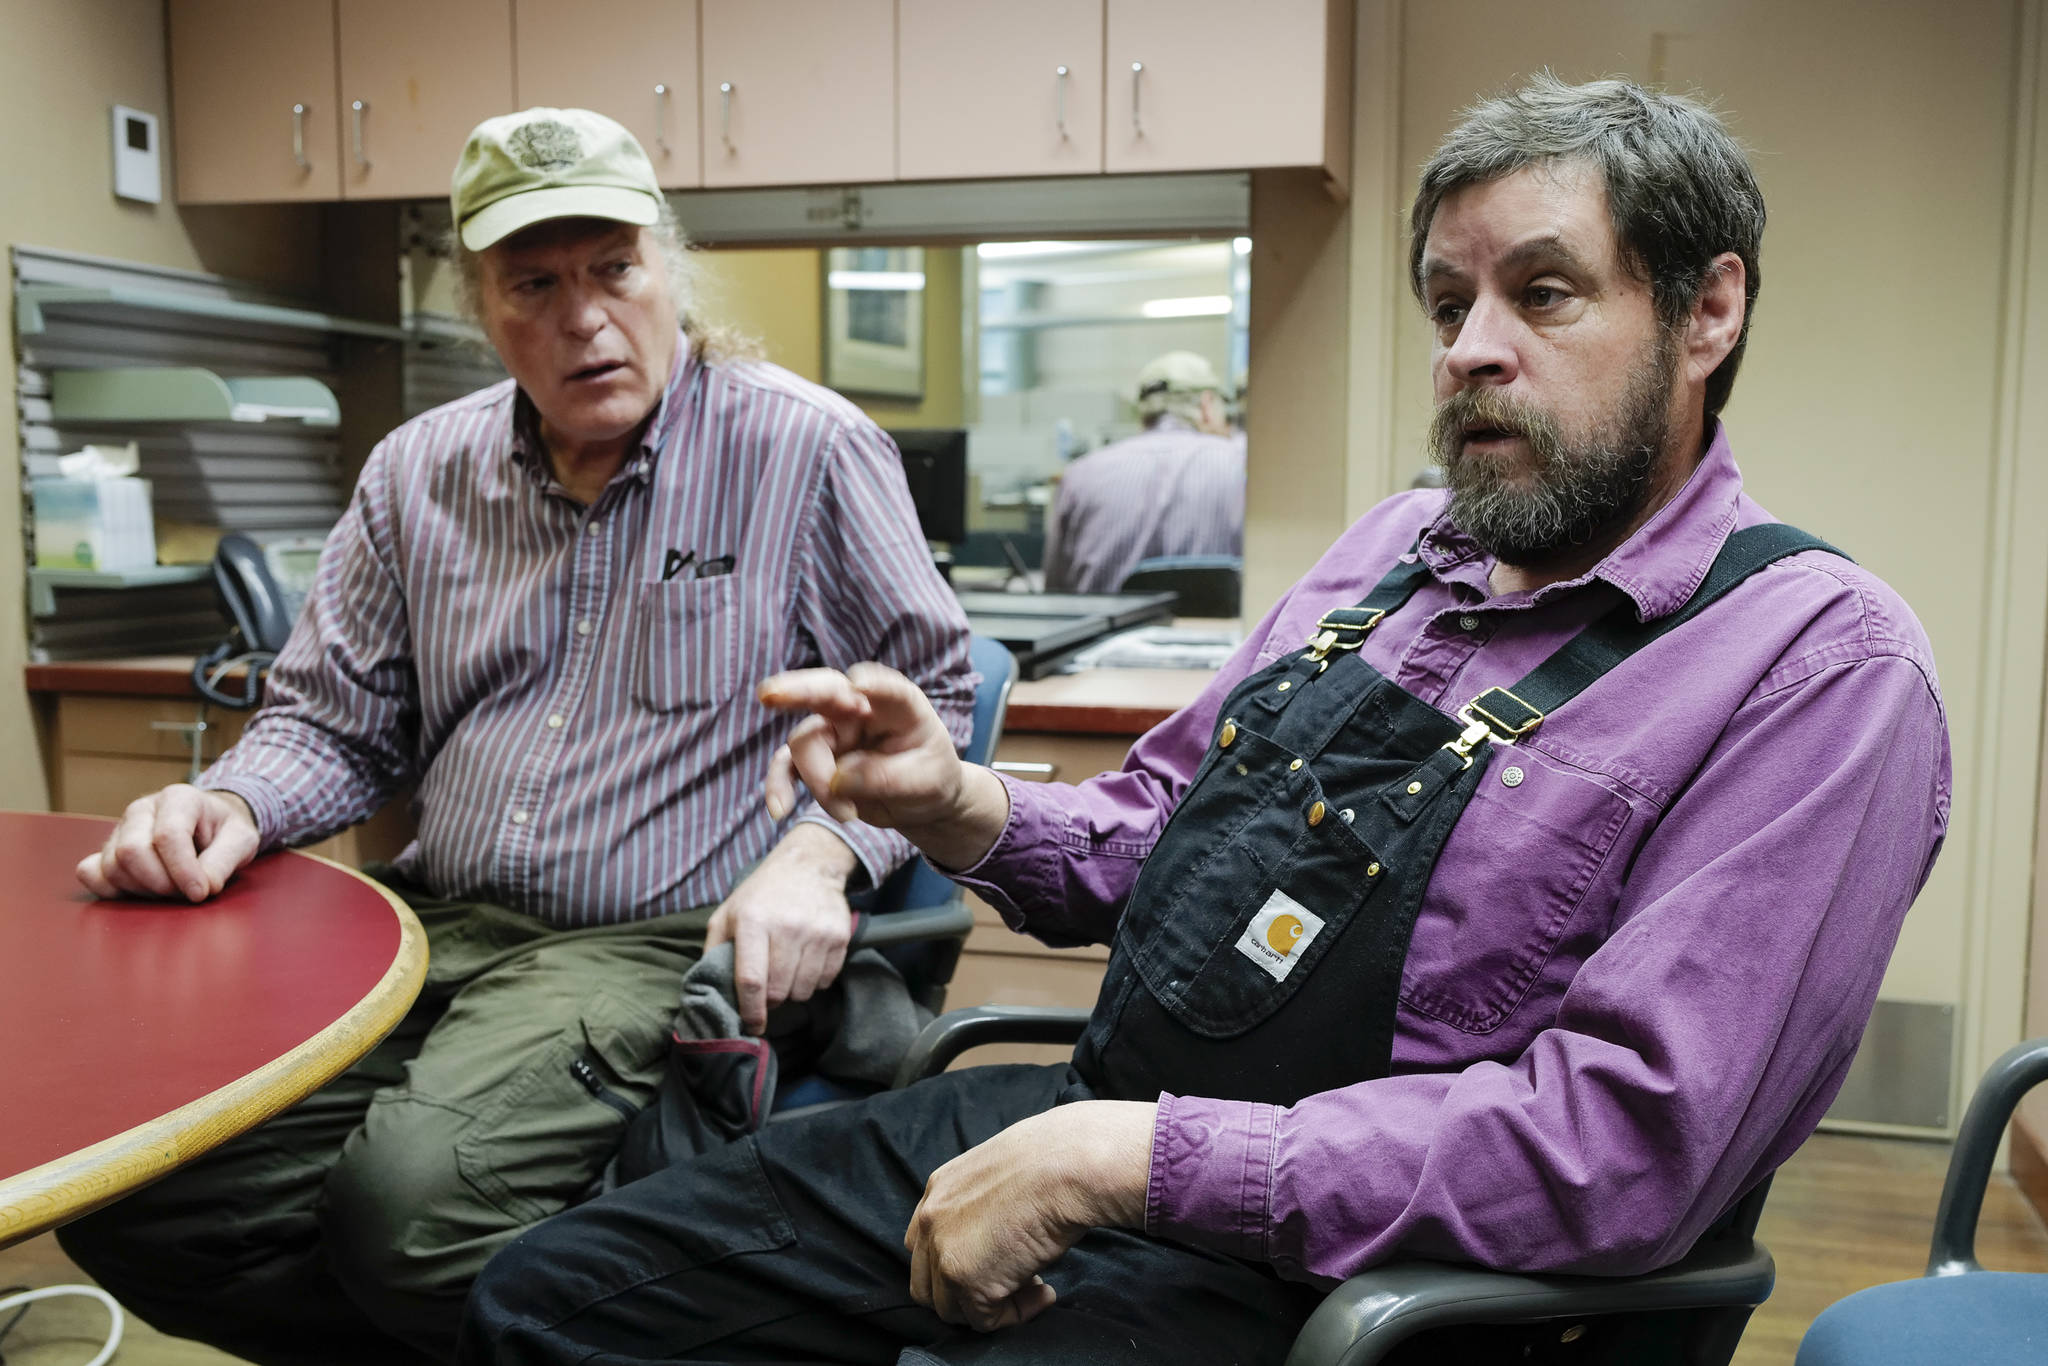 Joe Emerson, left, and Keith Heller, of Shoreline Wild Salmon, talk Thursday, Oct. 31, 2019, about their new business delivering troll-caught salmon to both local and out-of-state markets. (Michael Penn | Juneau Empire)